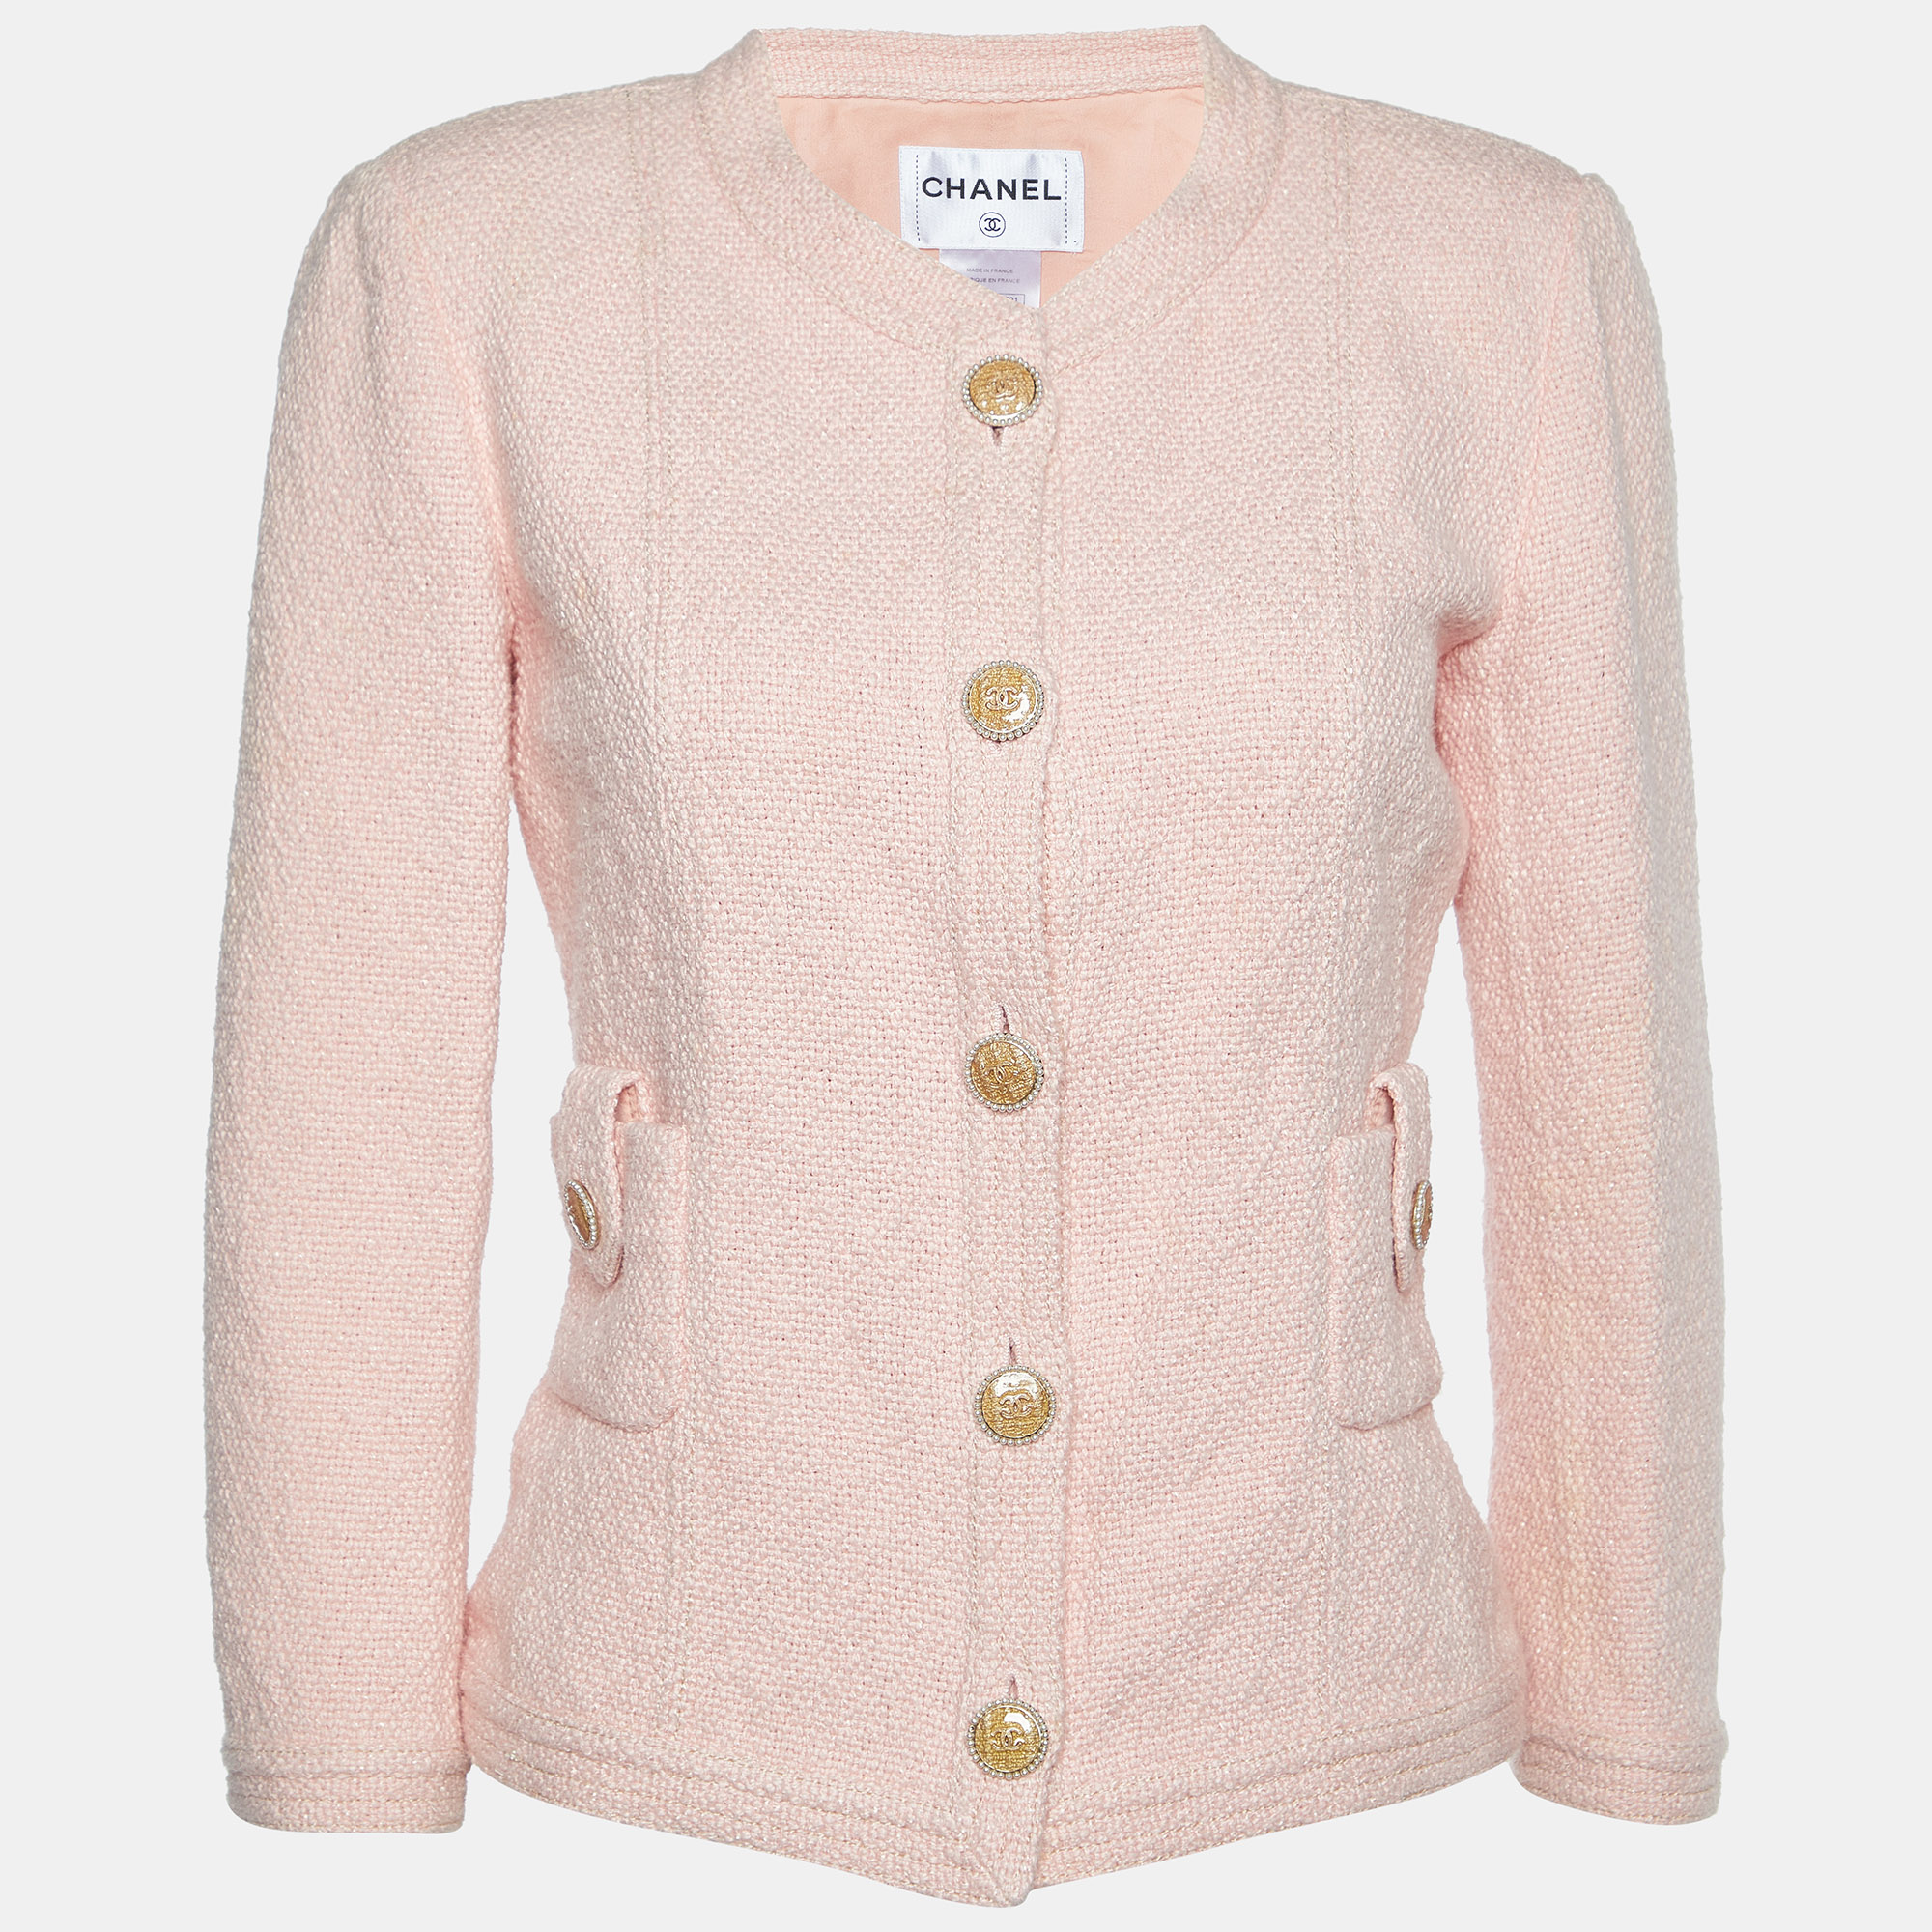 Chanel pink tweed button front jacket m